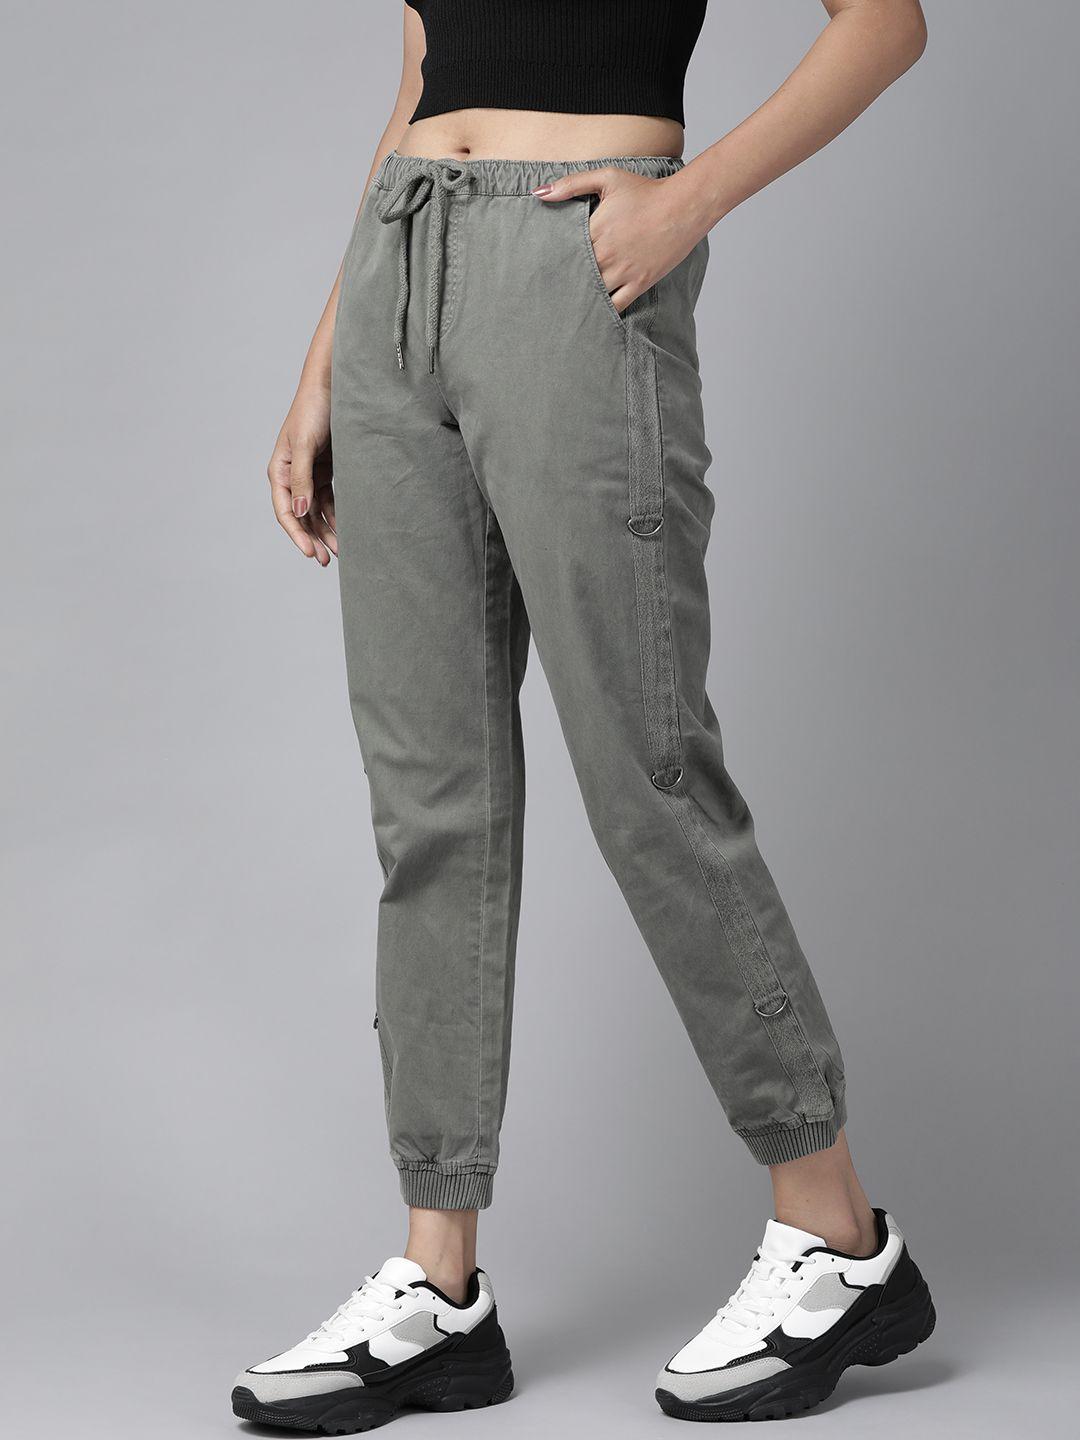 the-roadster-lifestyle-co-women-olive-green-jogger-sustainable-trousers